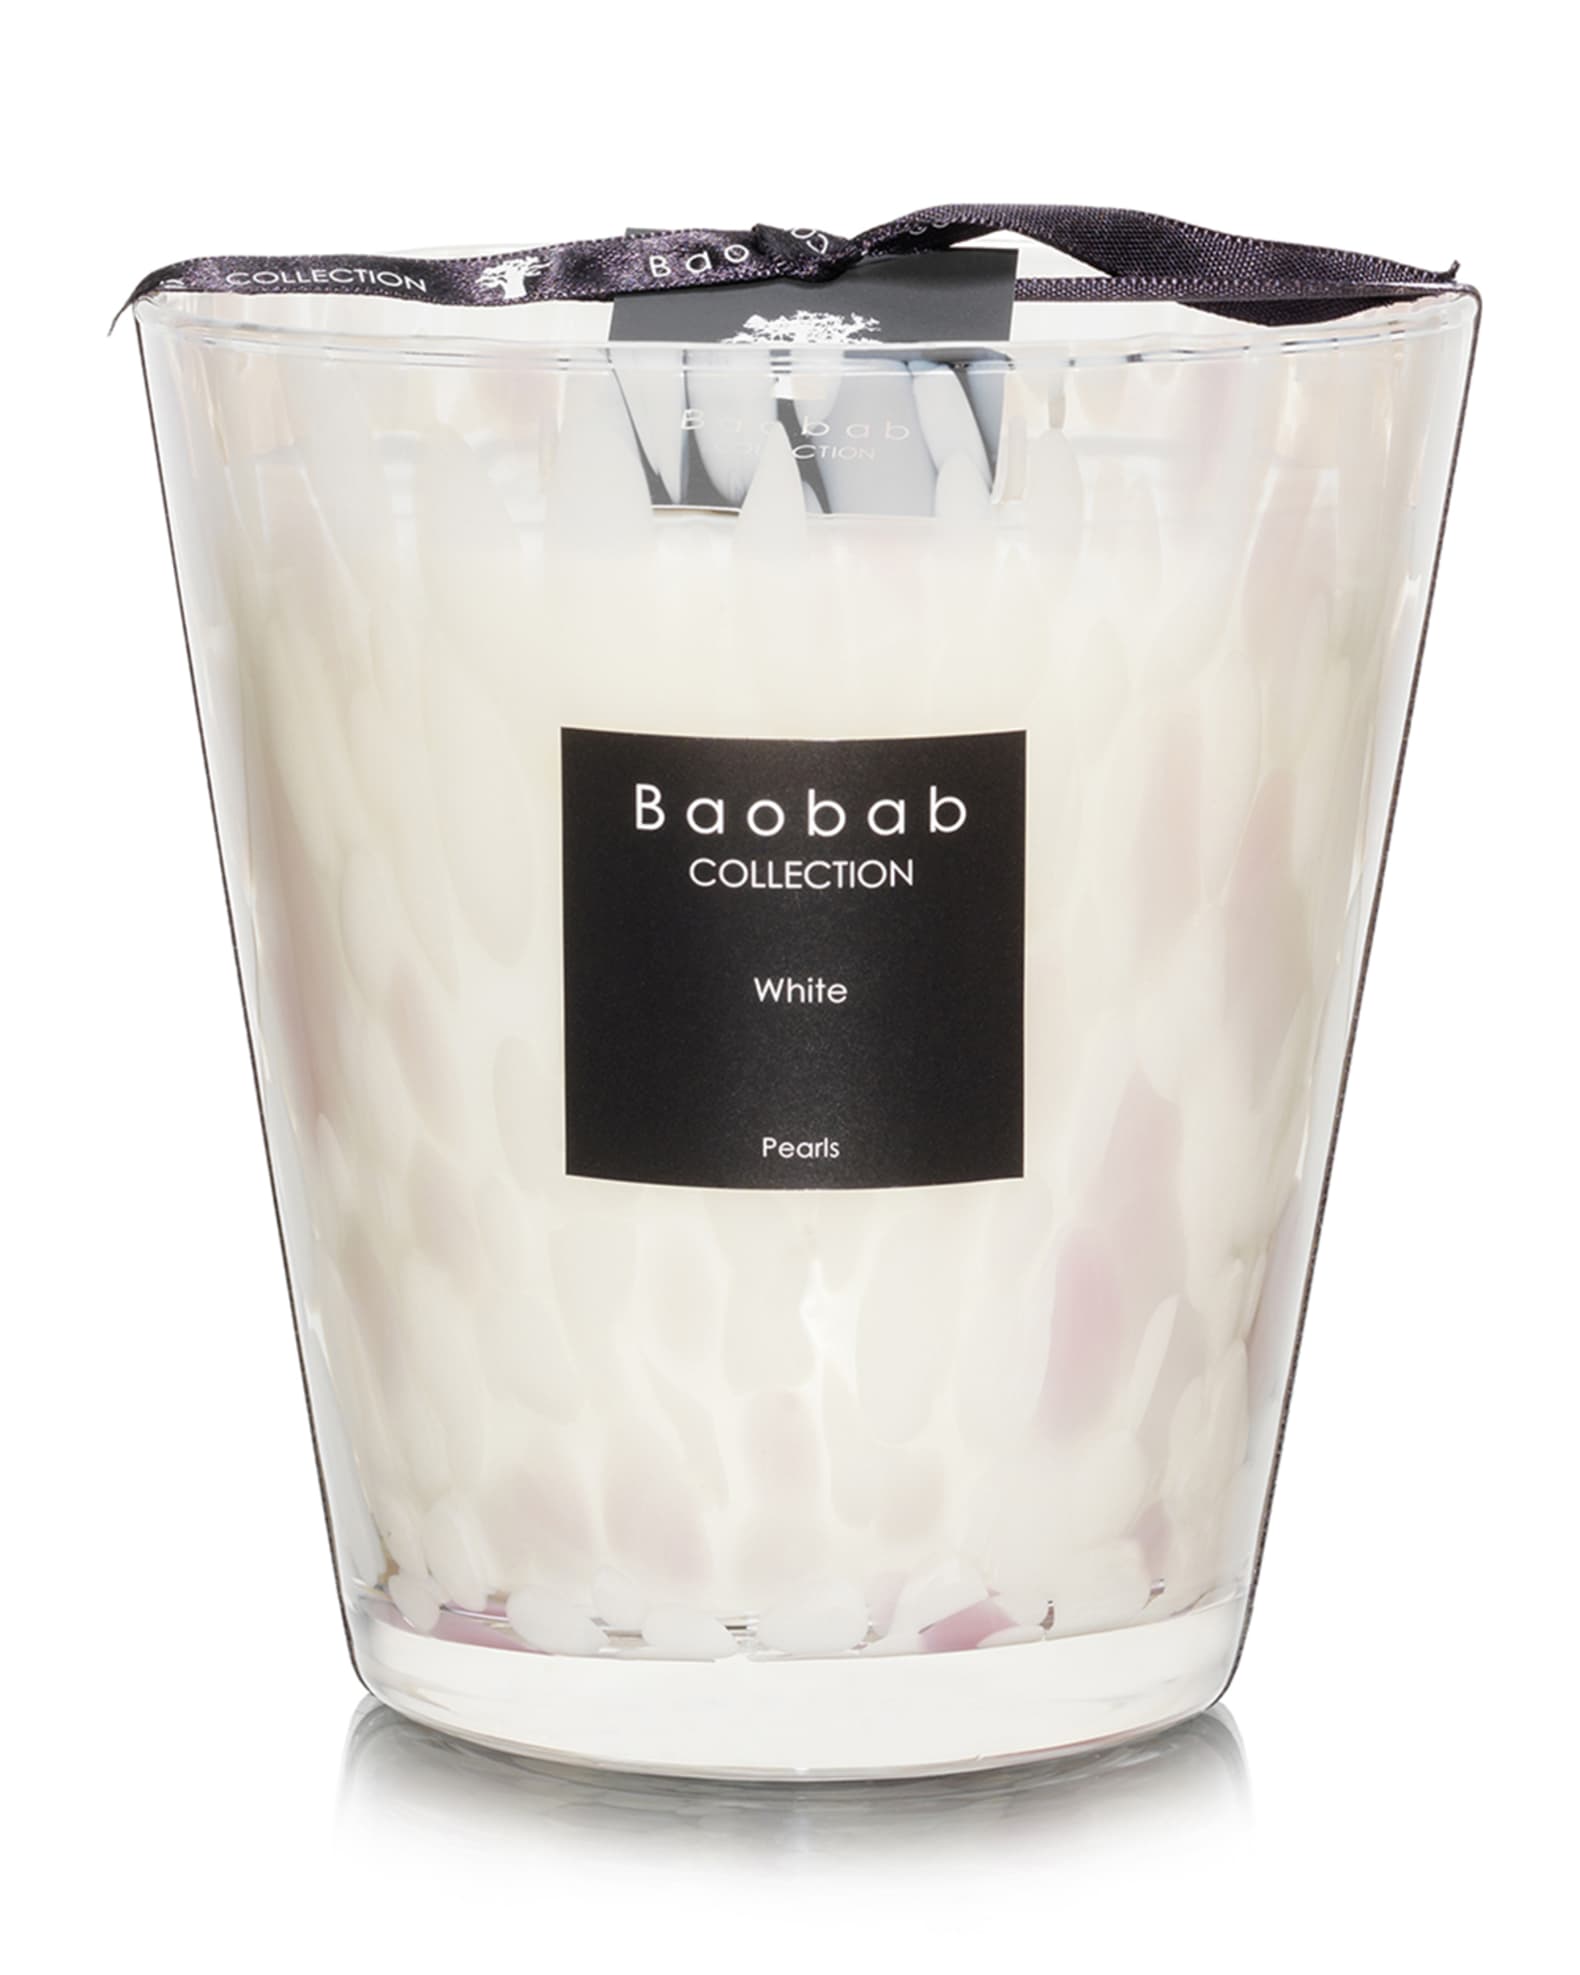 Baobab Collection White Pearls Candle, 6.3